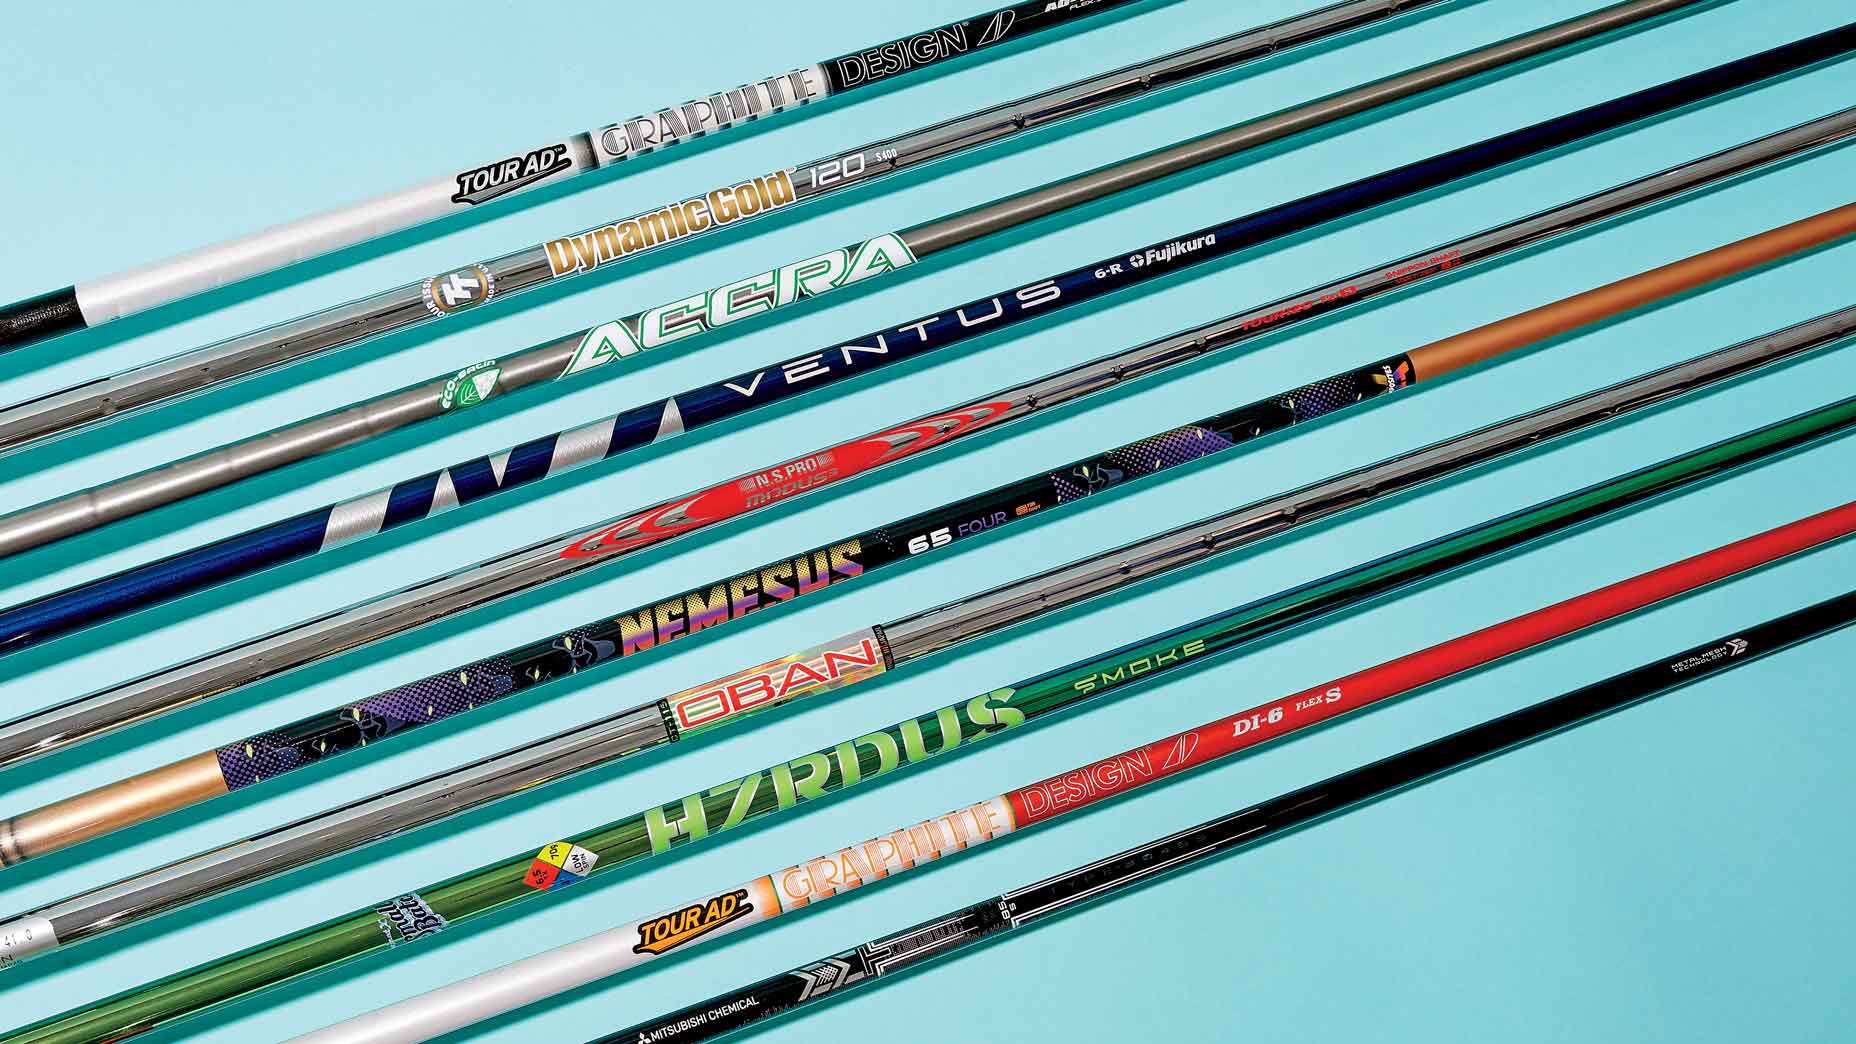 10 top-selling wood and iron shafts that will change your game